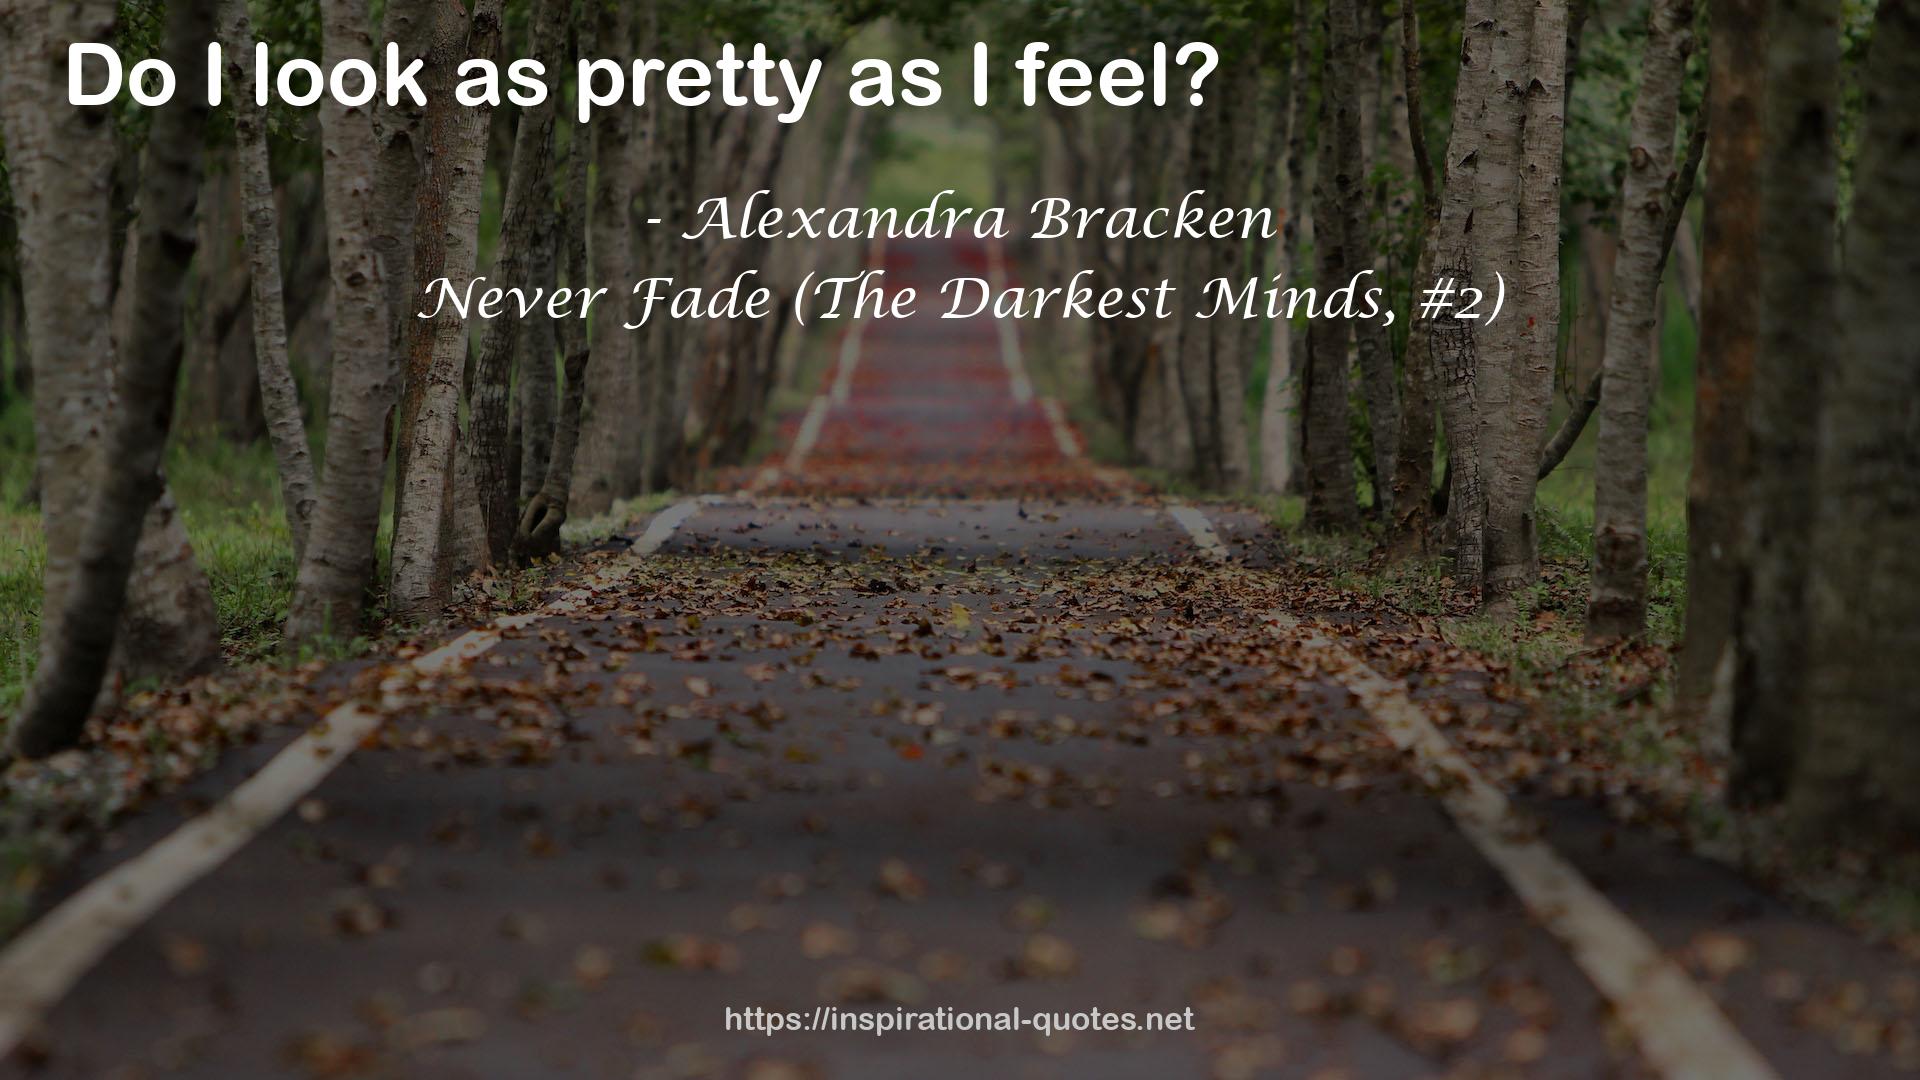 Never Fade (The Darkest Minds, #2) QUOTES